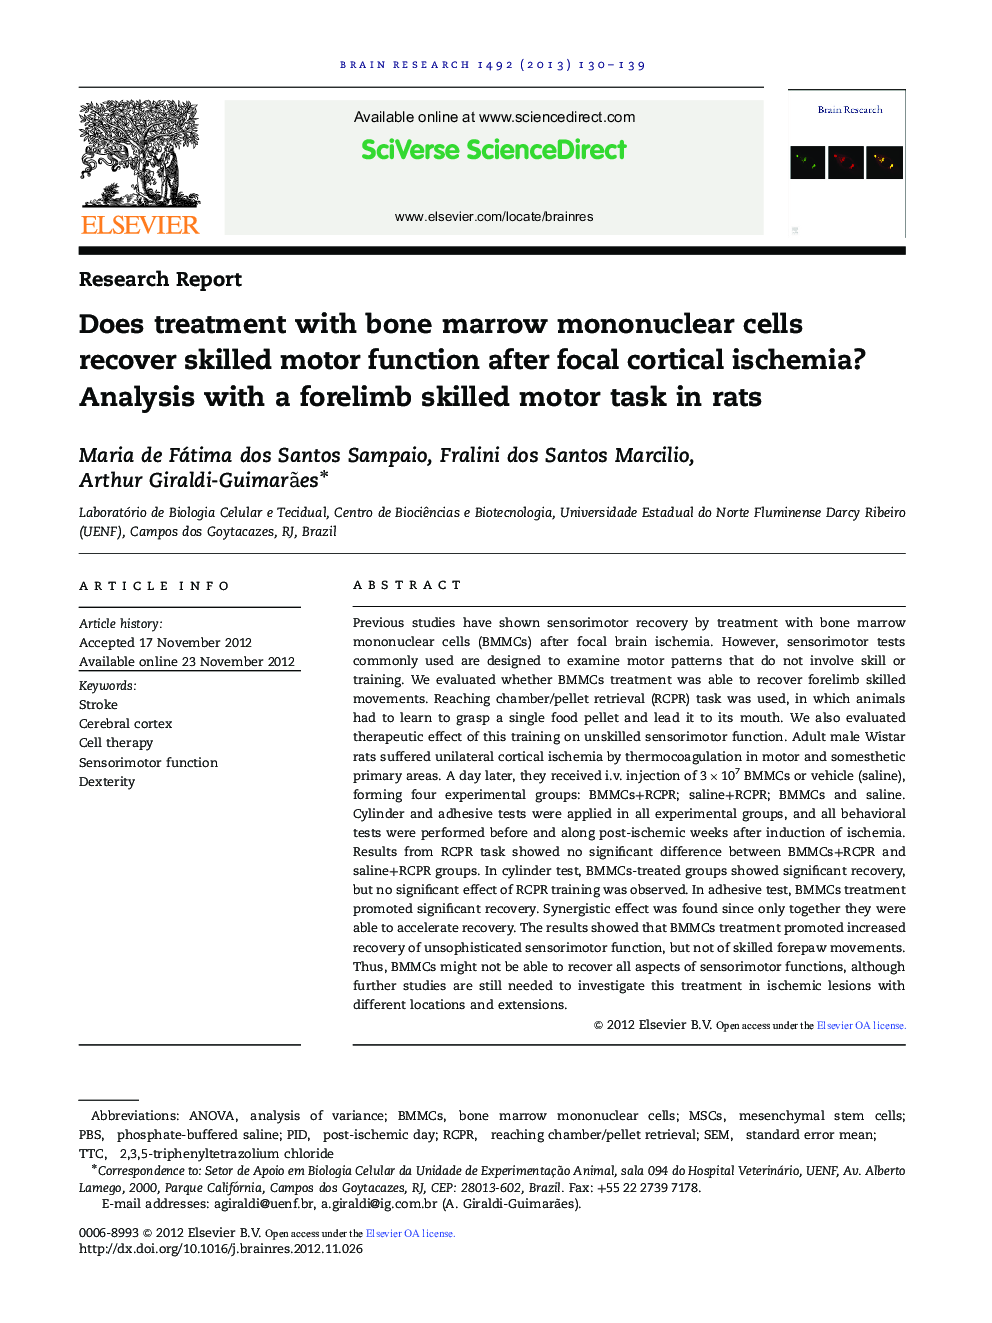 Research ReportDoes treatment with bone marrow mononuclear cells recover skilled motor function after focal cortical ischemia? Analysis with a forelimb skilled motor task in rats